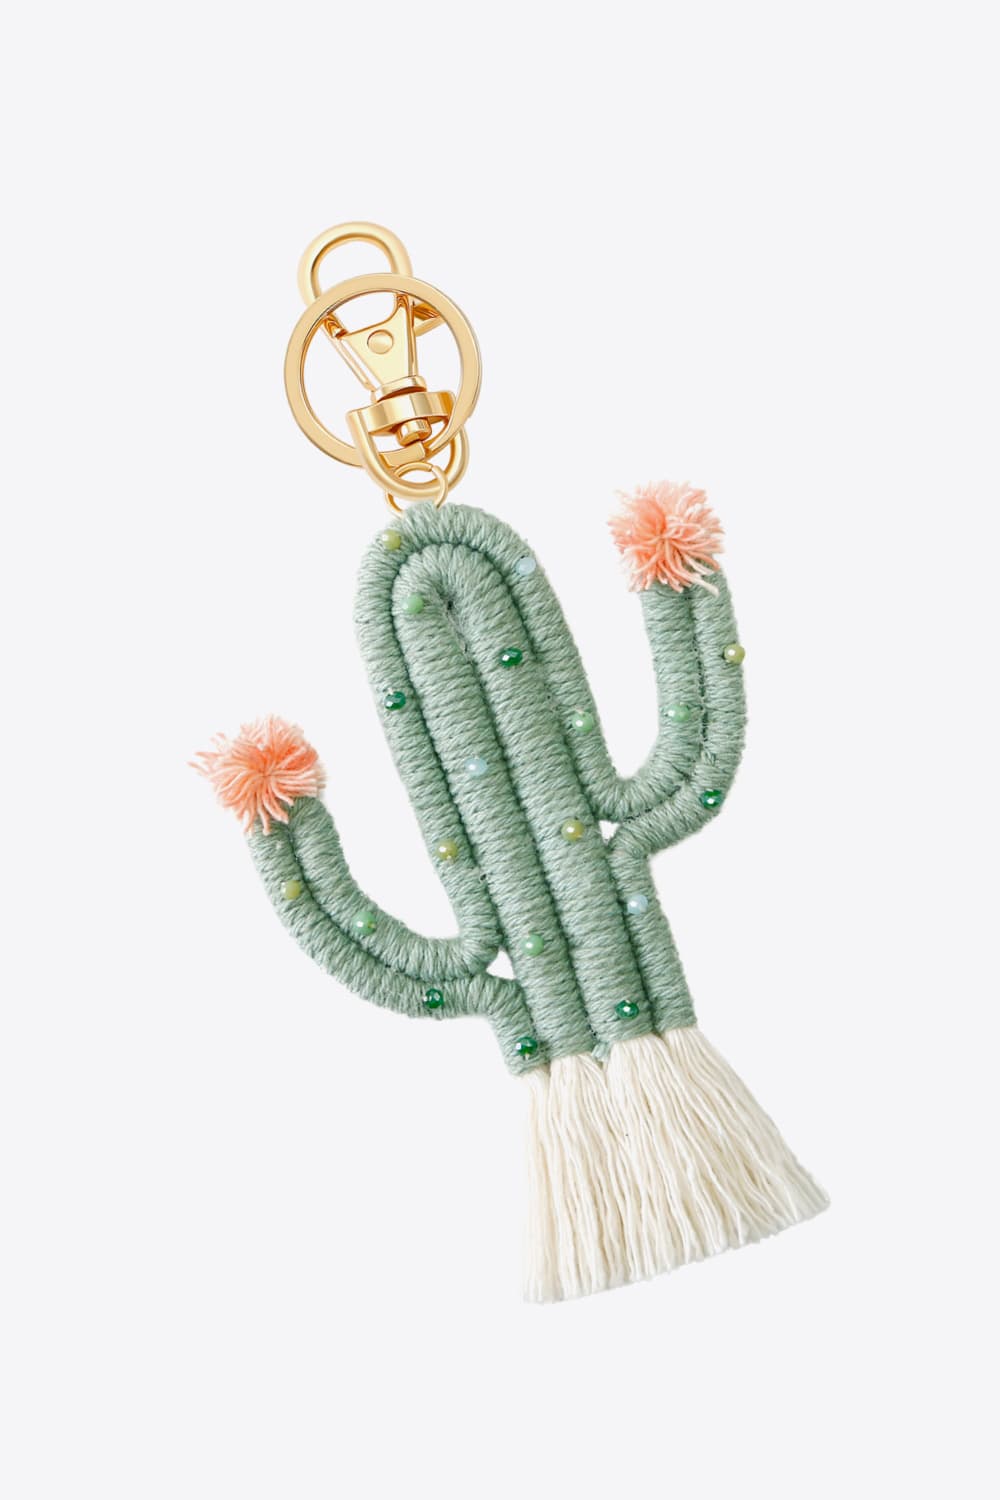 Trendsi Cupid Beauty Supplies Keychains Bead Trim Cactus Keychain with Fringe